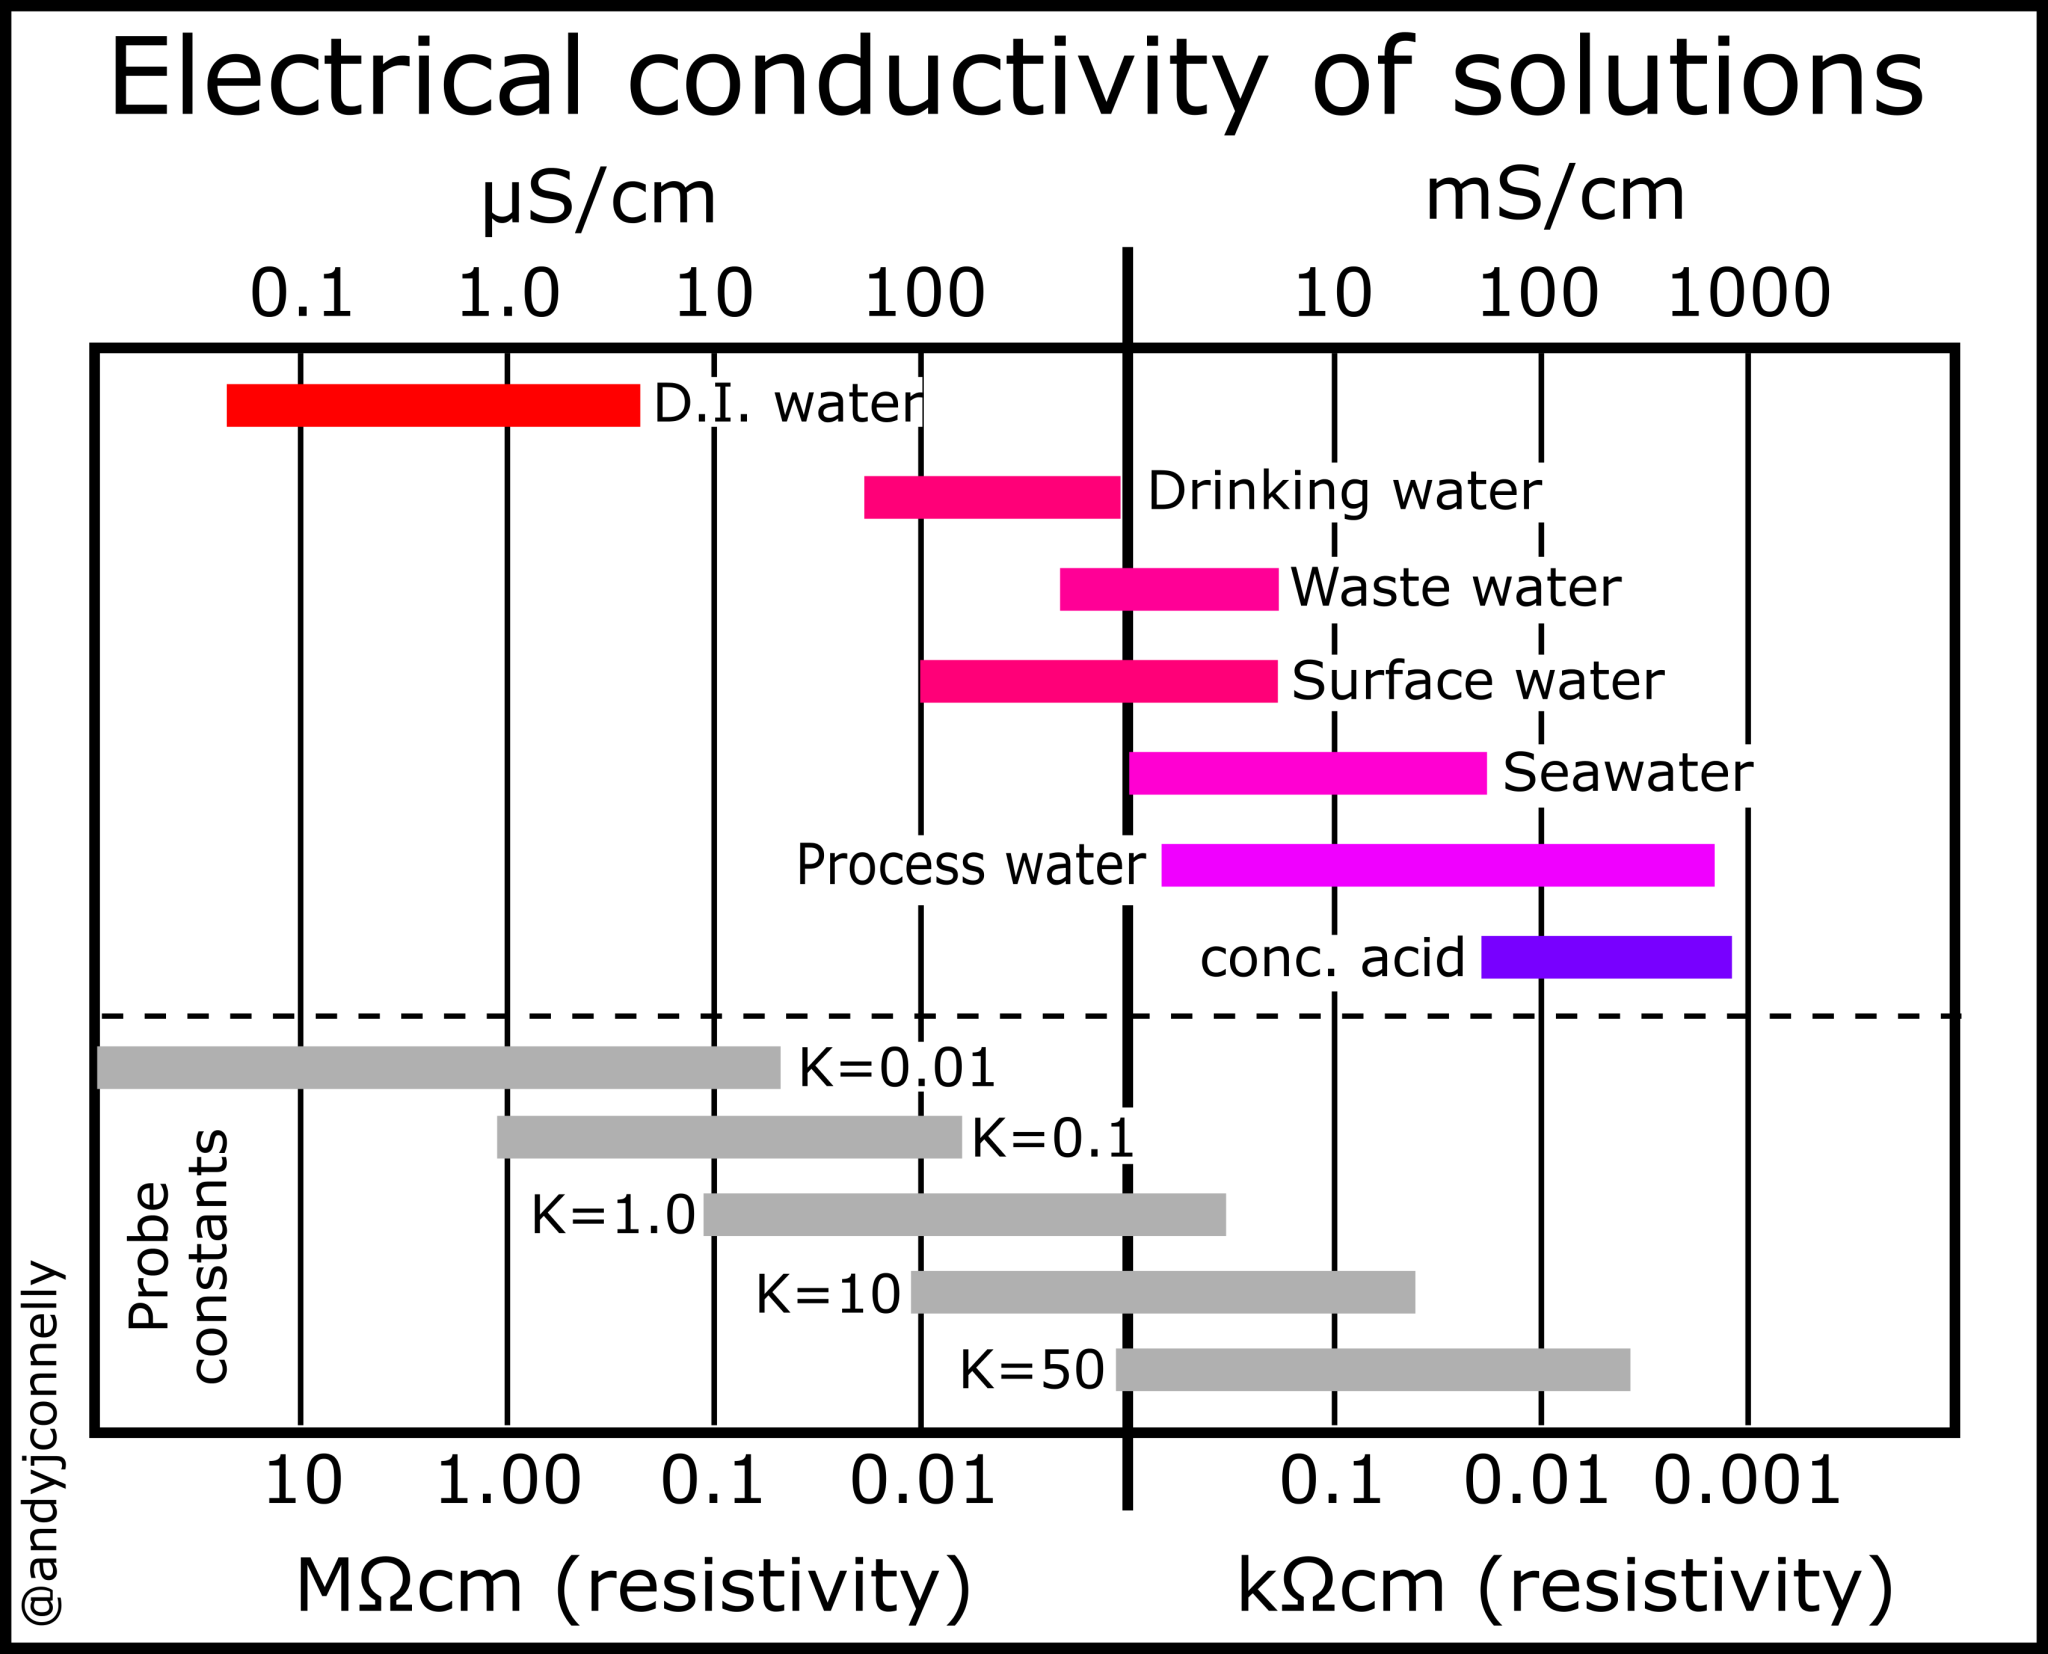 Electrical conductivity of some common solutions